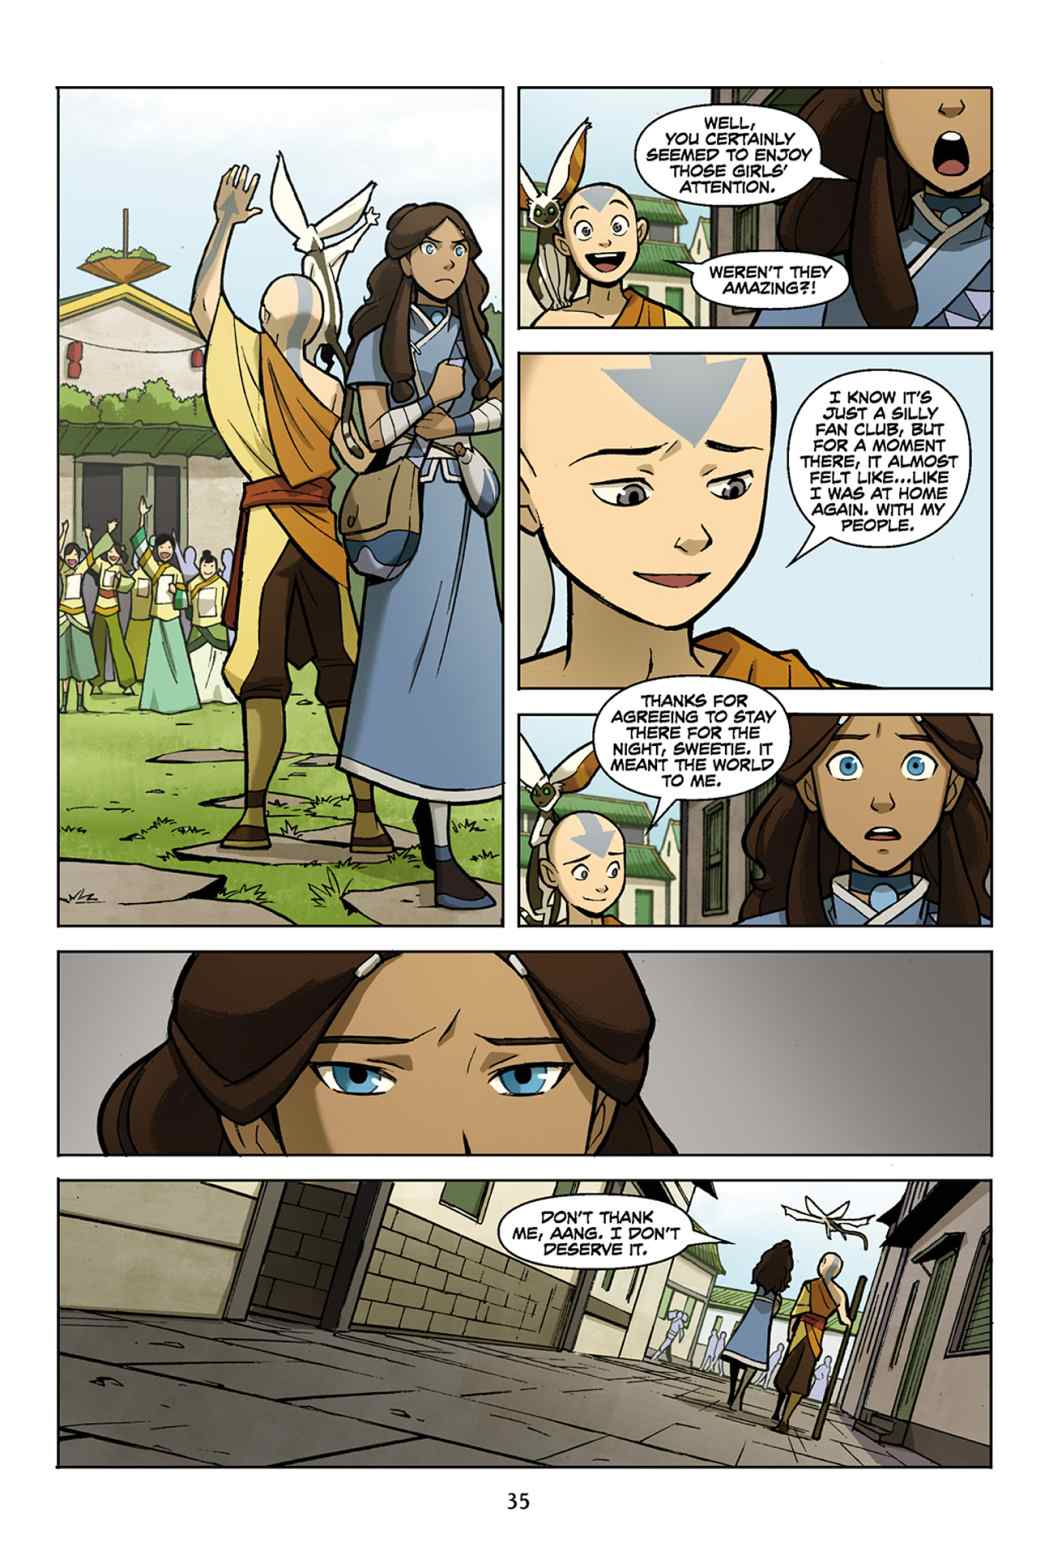 Read Comics Online Free - Avatar The Last Airbender Comic Book Issue #002 -  Page 36